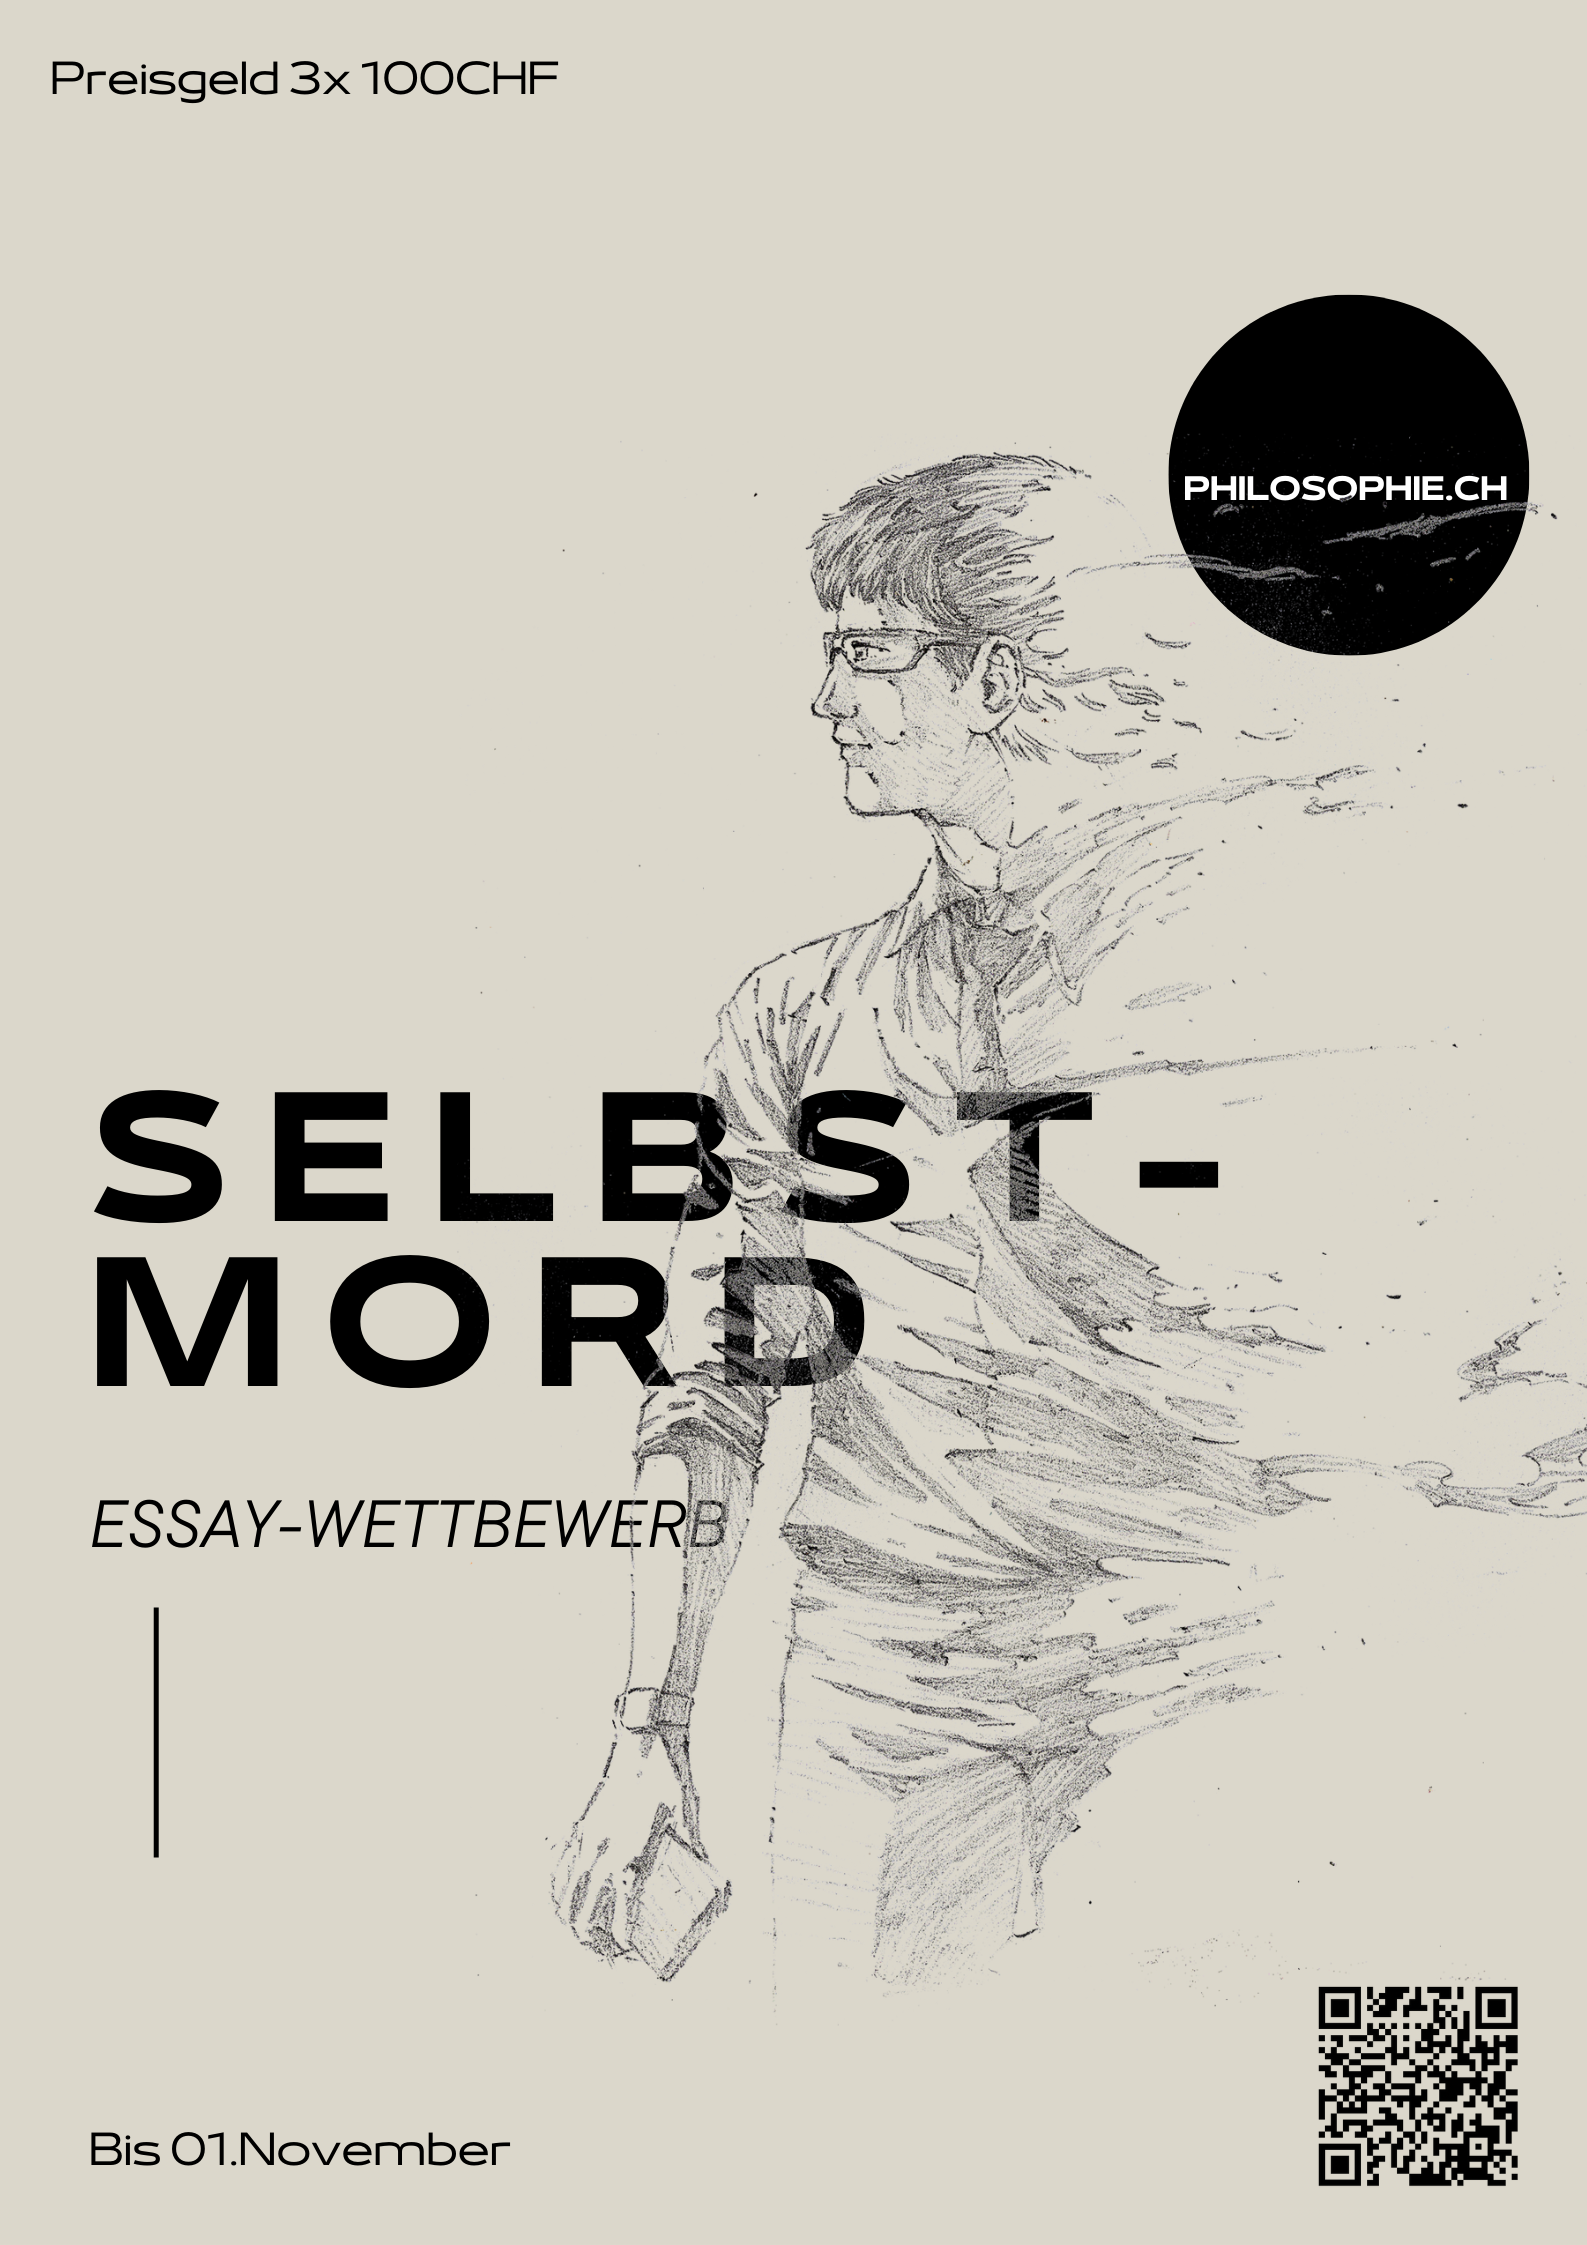 Selbstmord poster